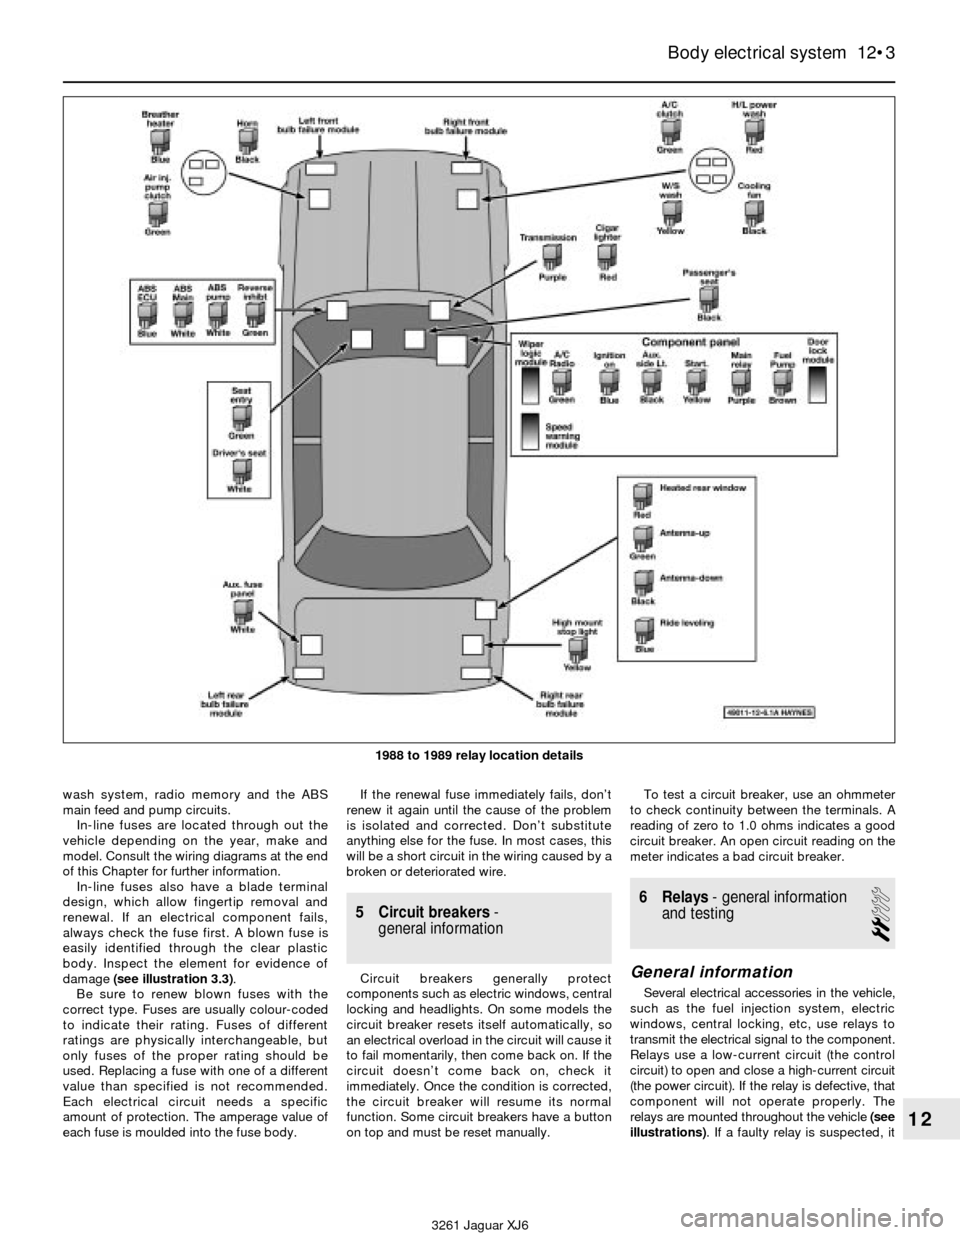 JAGUAR XJ6 1997 2.G Workshop Manual wash system, radio memory and the ABS
main feed and pump circuits.
In-line fuses are located through out the
vehicle depending on the year, make and
model. Consult the wiring diagrams at the end
of th